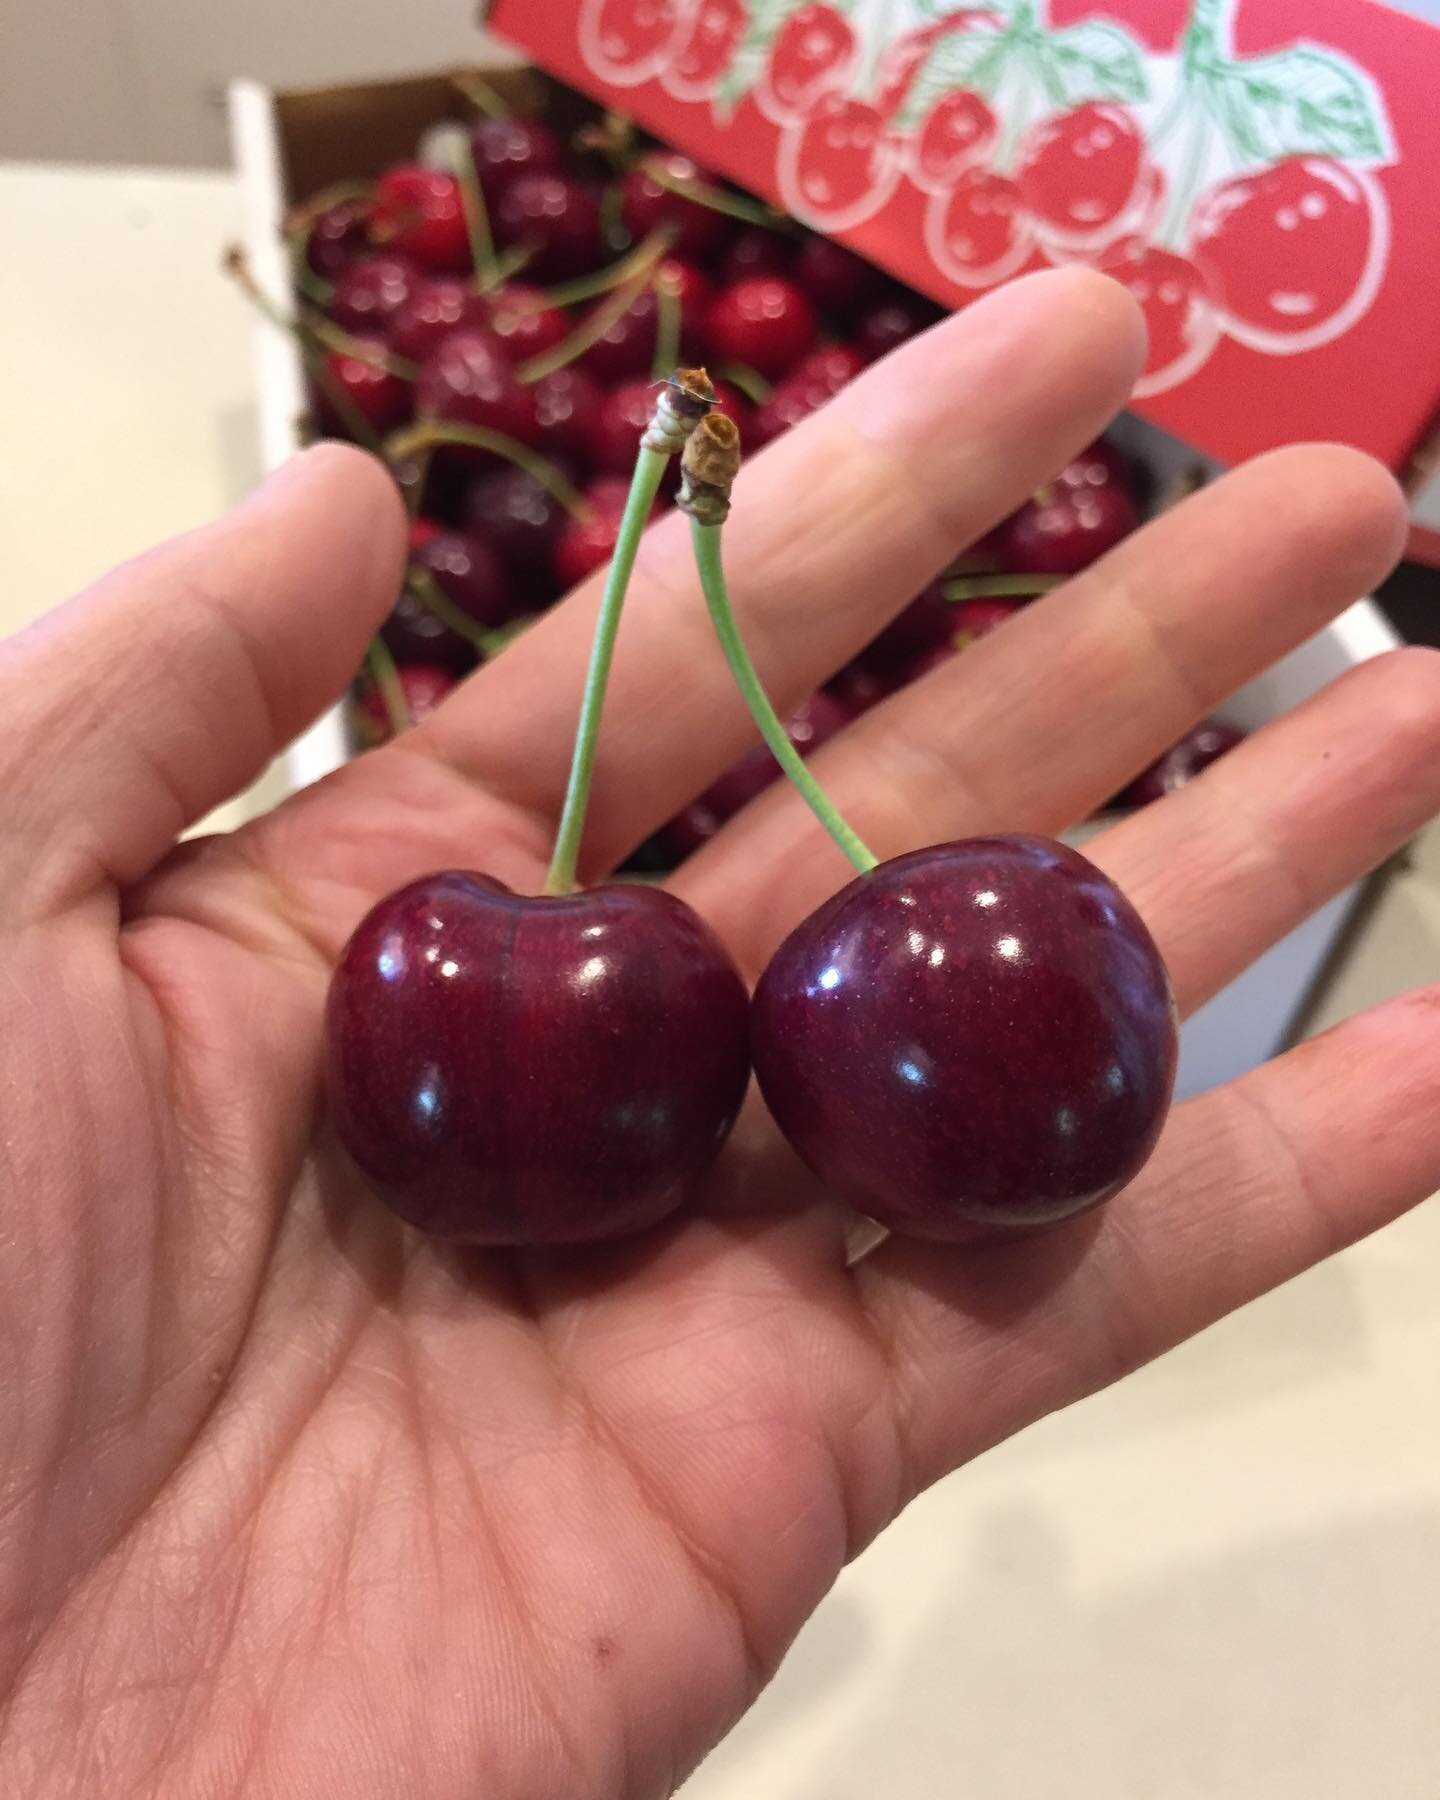 Treat yourself to the taste sensation of Demeter certified biodynamic cherries this season 🍒&hearts;️
Ask your local organic store to buy your Upton Grove cherries... they taste even better than they look! 
Farmgate pickup is encouraged but availabl